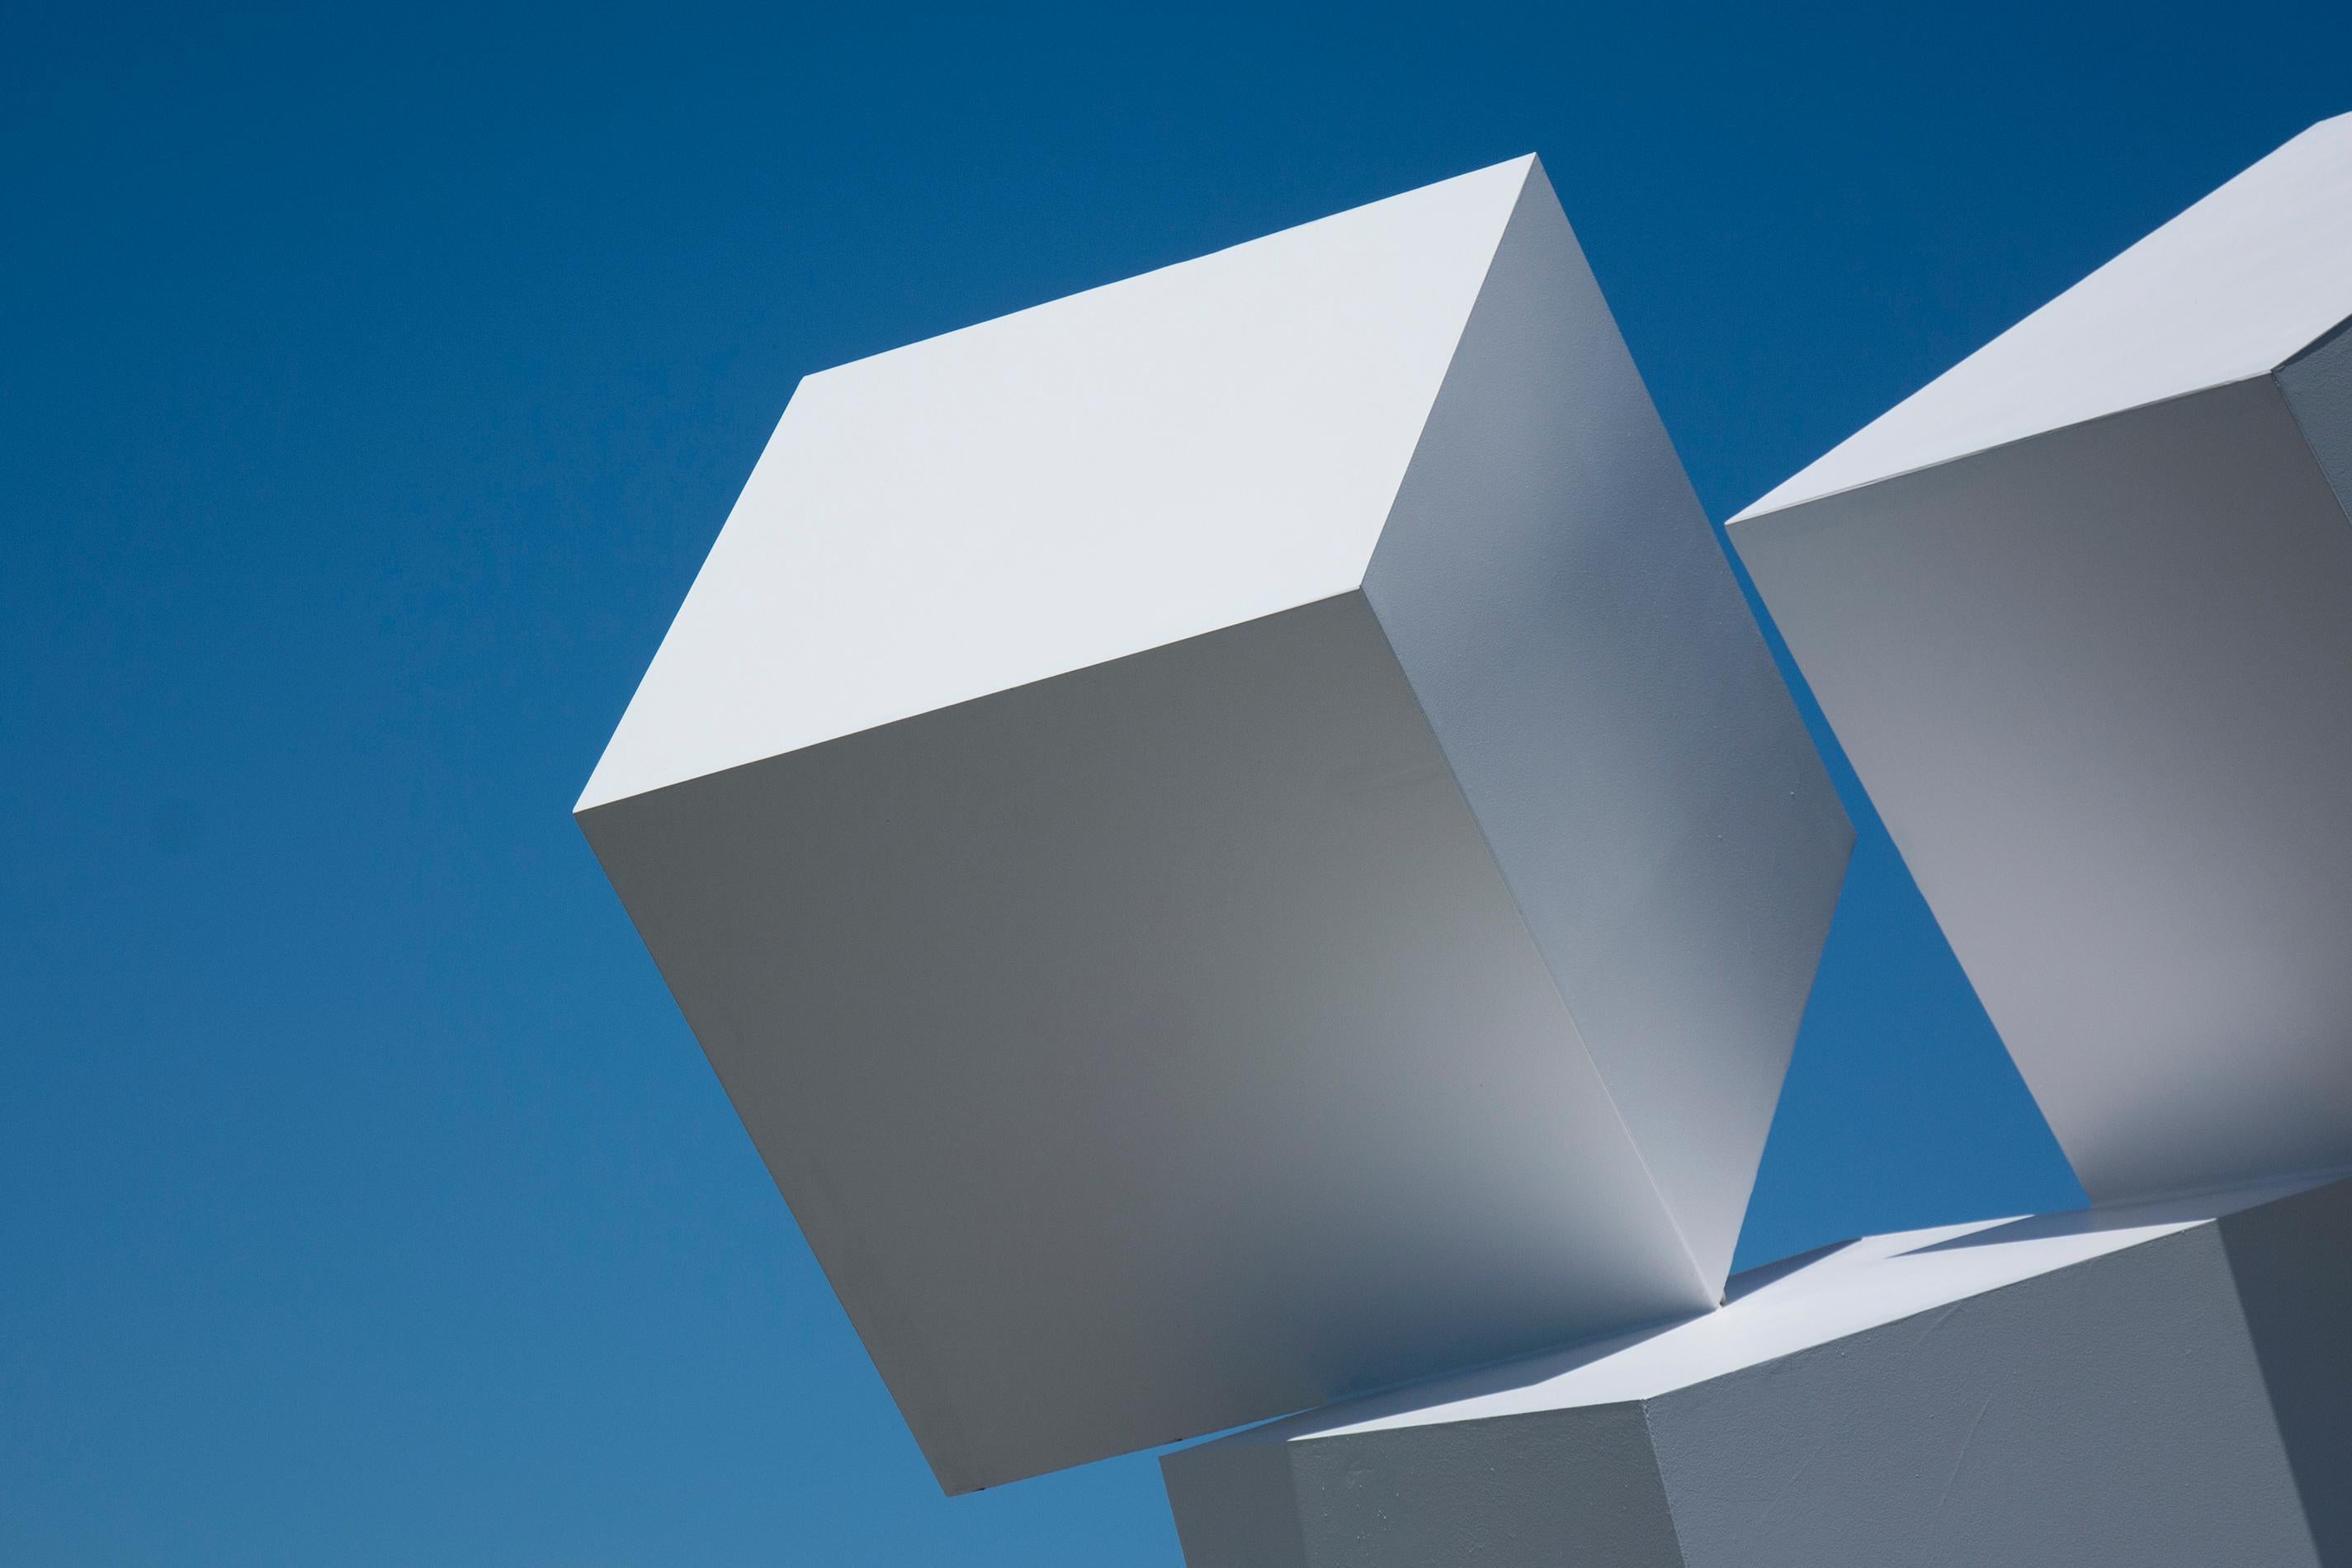 Impossibly balanced, these three white cubes form one monolithic outdoor structure. At night the sides of the cubes appear as free-floating diamonds. This painted, aluminum sculpture is stone white. It is available by commission and titled Chute Des